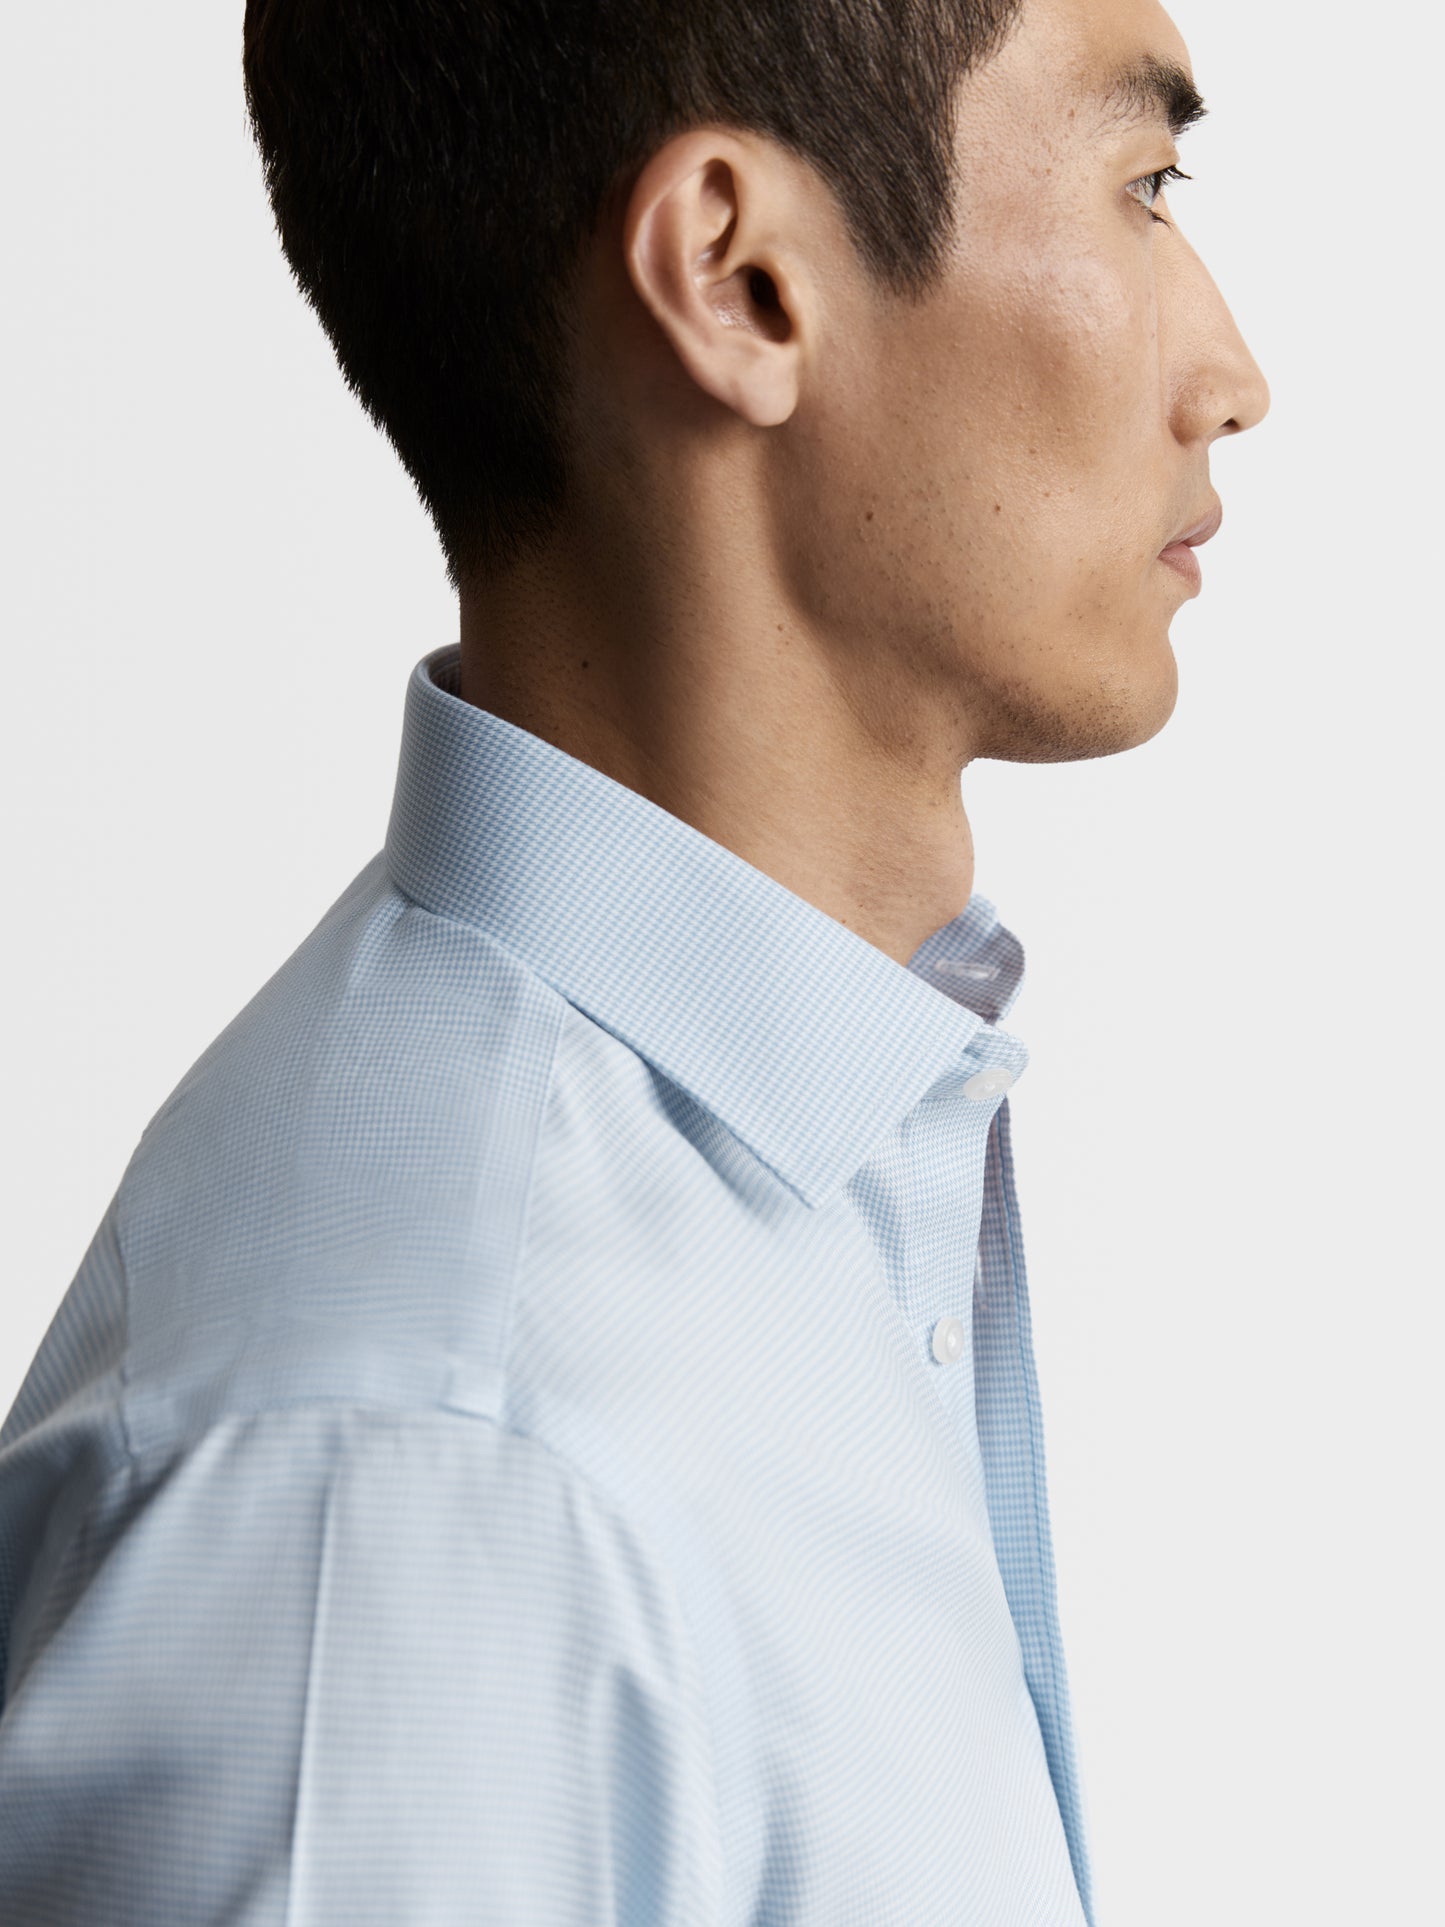 Image 3 of Non-Iron Light Blue Mini Dogtooth Plain Weave Super Fitted Single Cuff Classic Collar Shirt